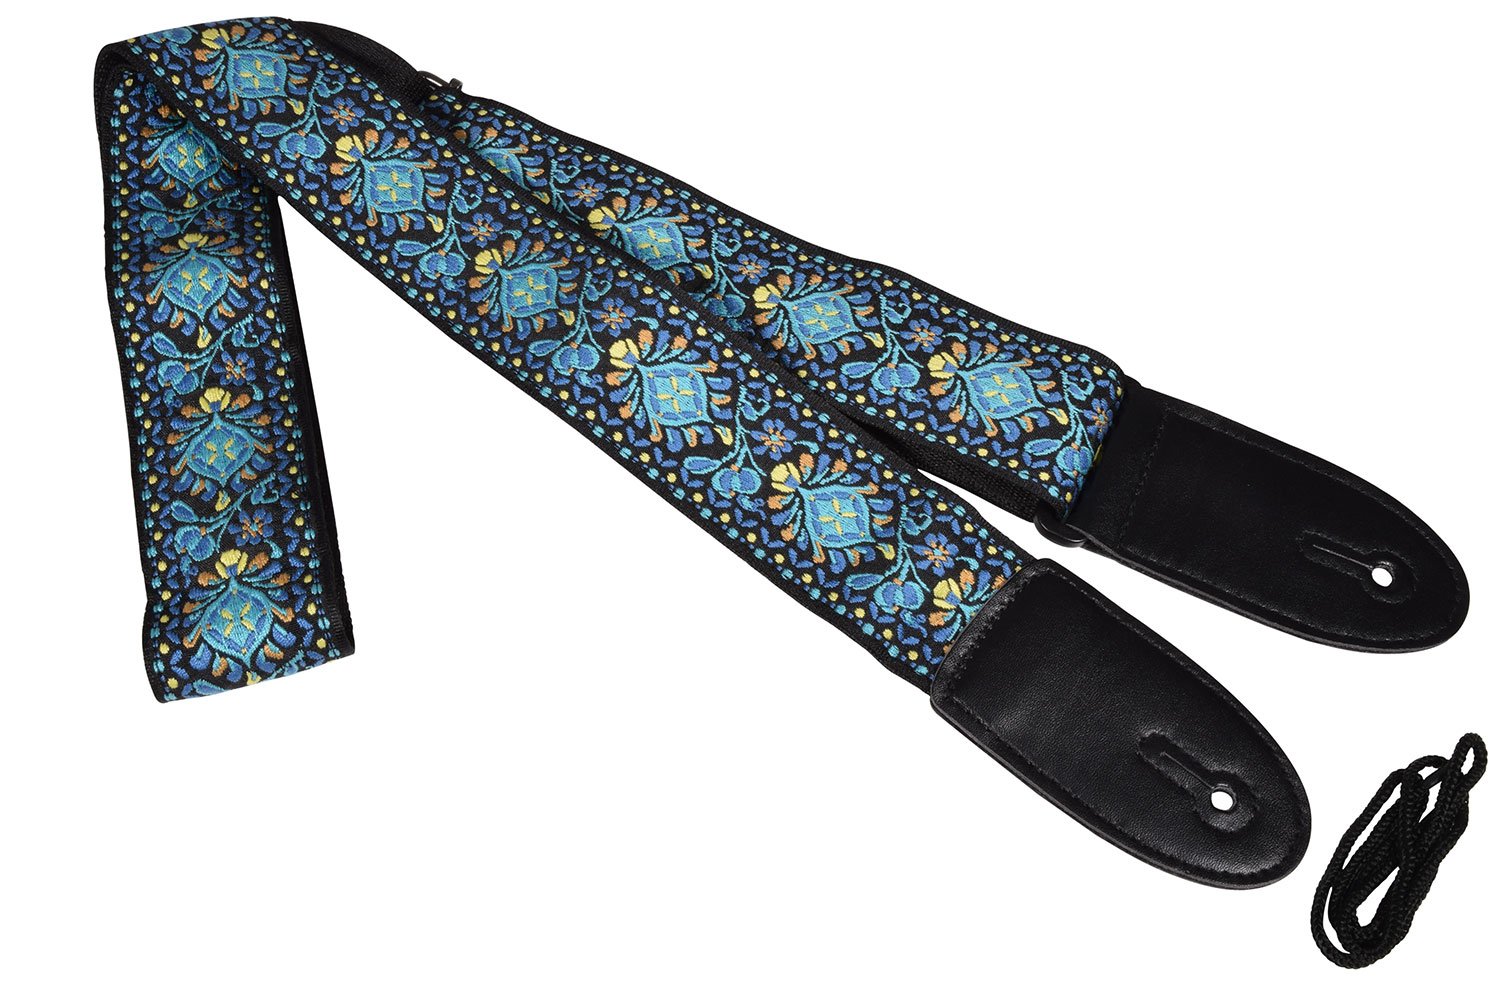 Deluxe Embroidered Design Guitar Straps Blue Floral Deluxe Guitar Strap